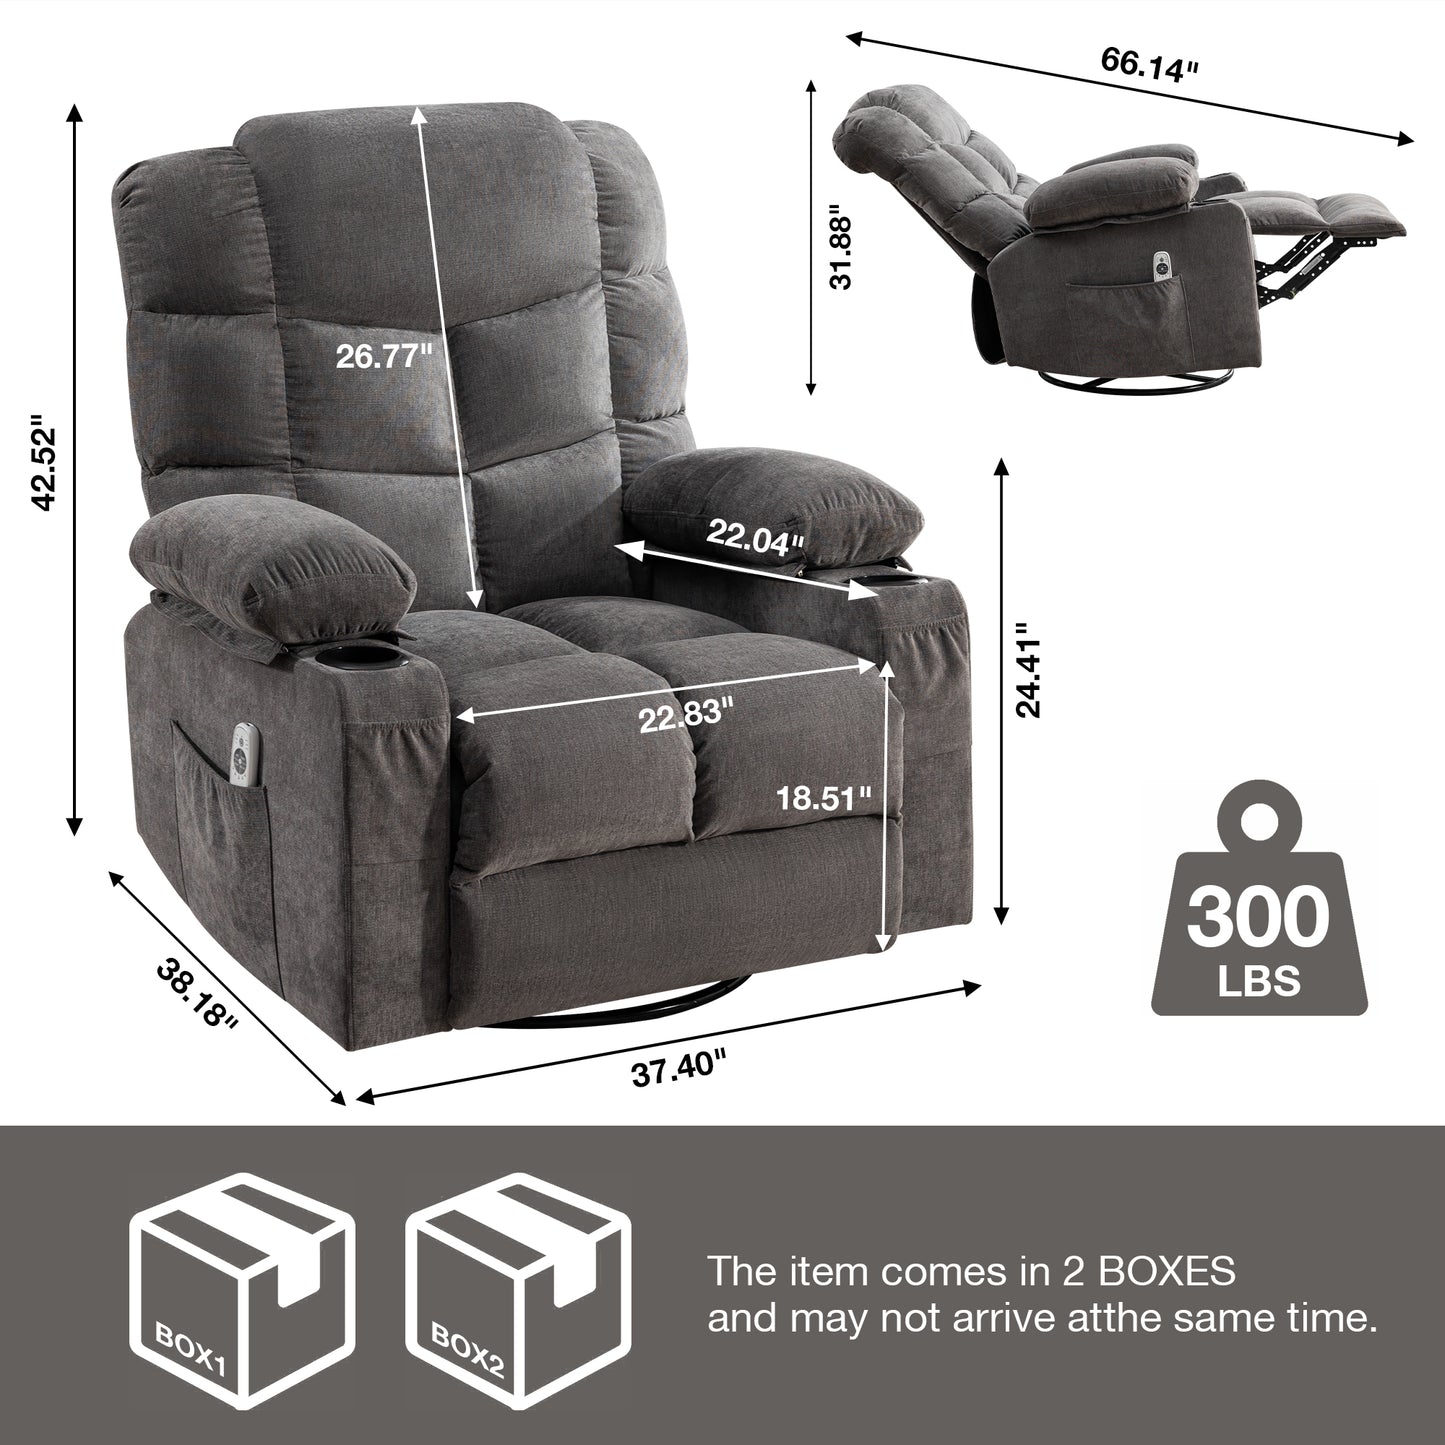 Power Lift Recliner Chair, HSUNNS 300lbs Capacity Electric Lift Recliner for Elderly, with Remote Control, Wide Seat, Side Pocket, Extended Footrest, Fabric Sofa Chairs for Living Room, Brown